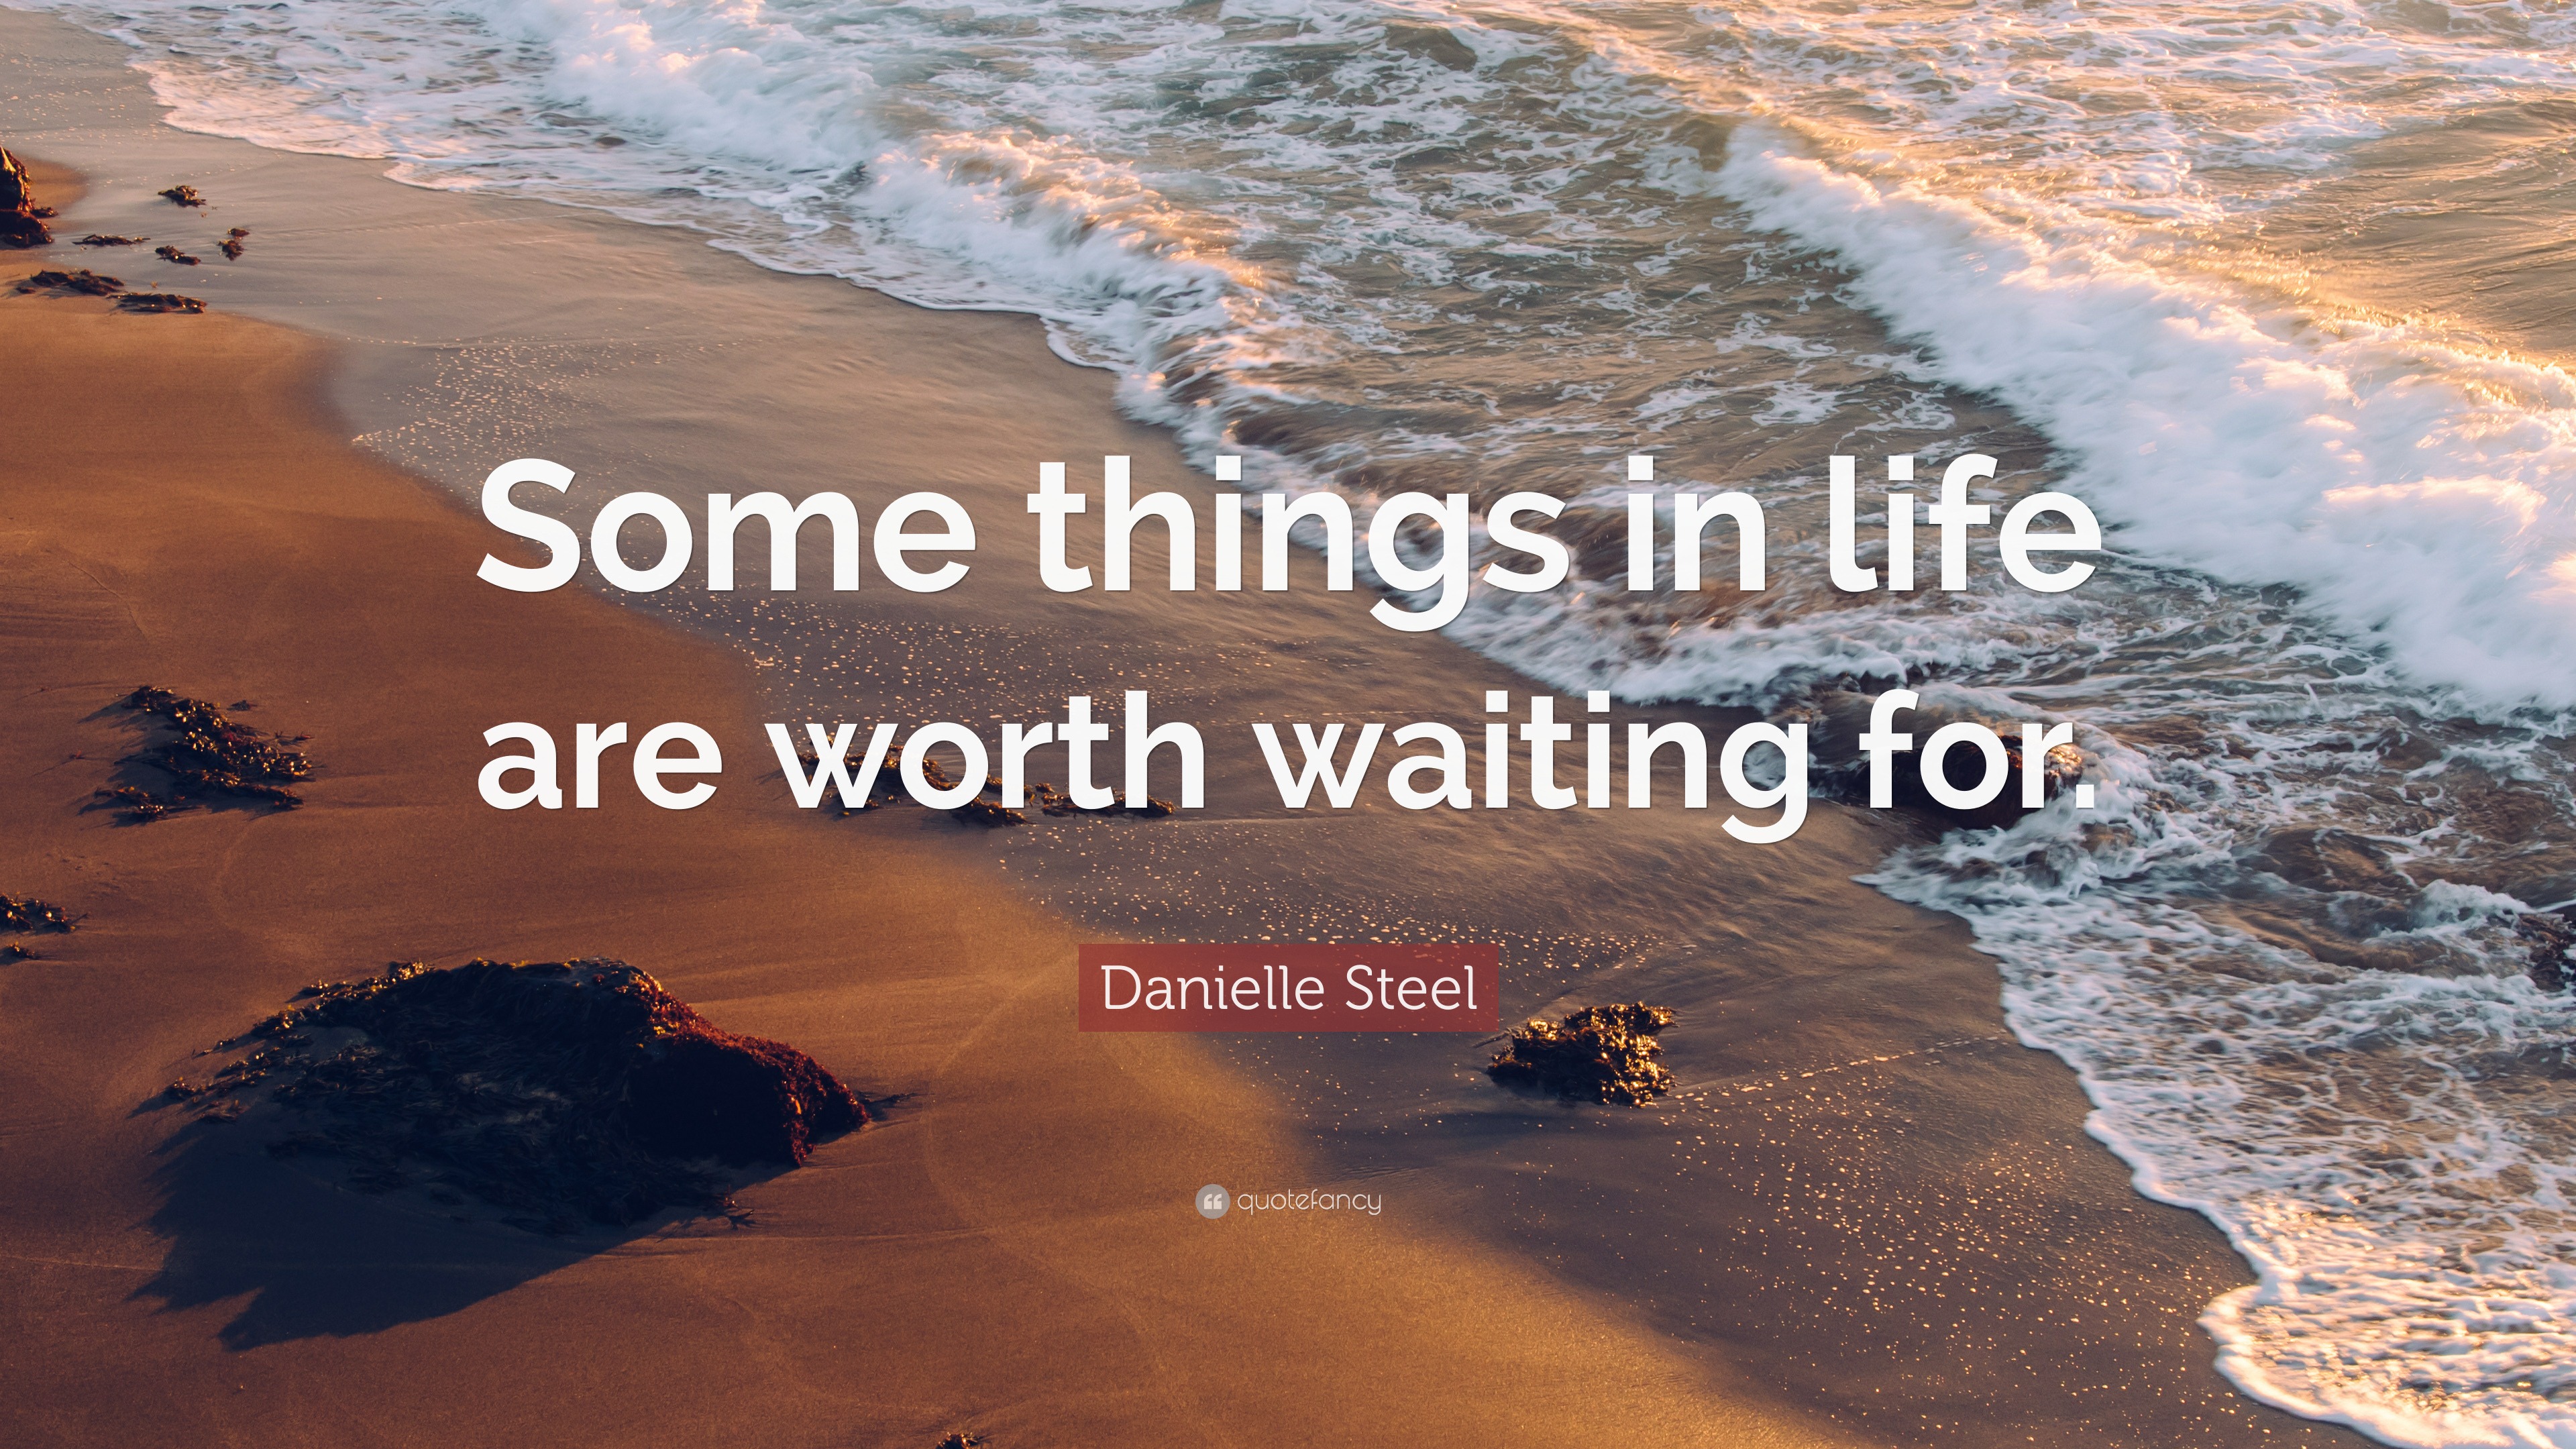 Danielle Steel Quote: “Some things in life are worth waiting for.”